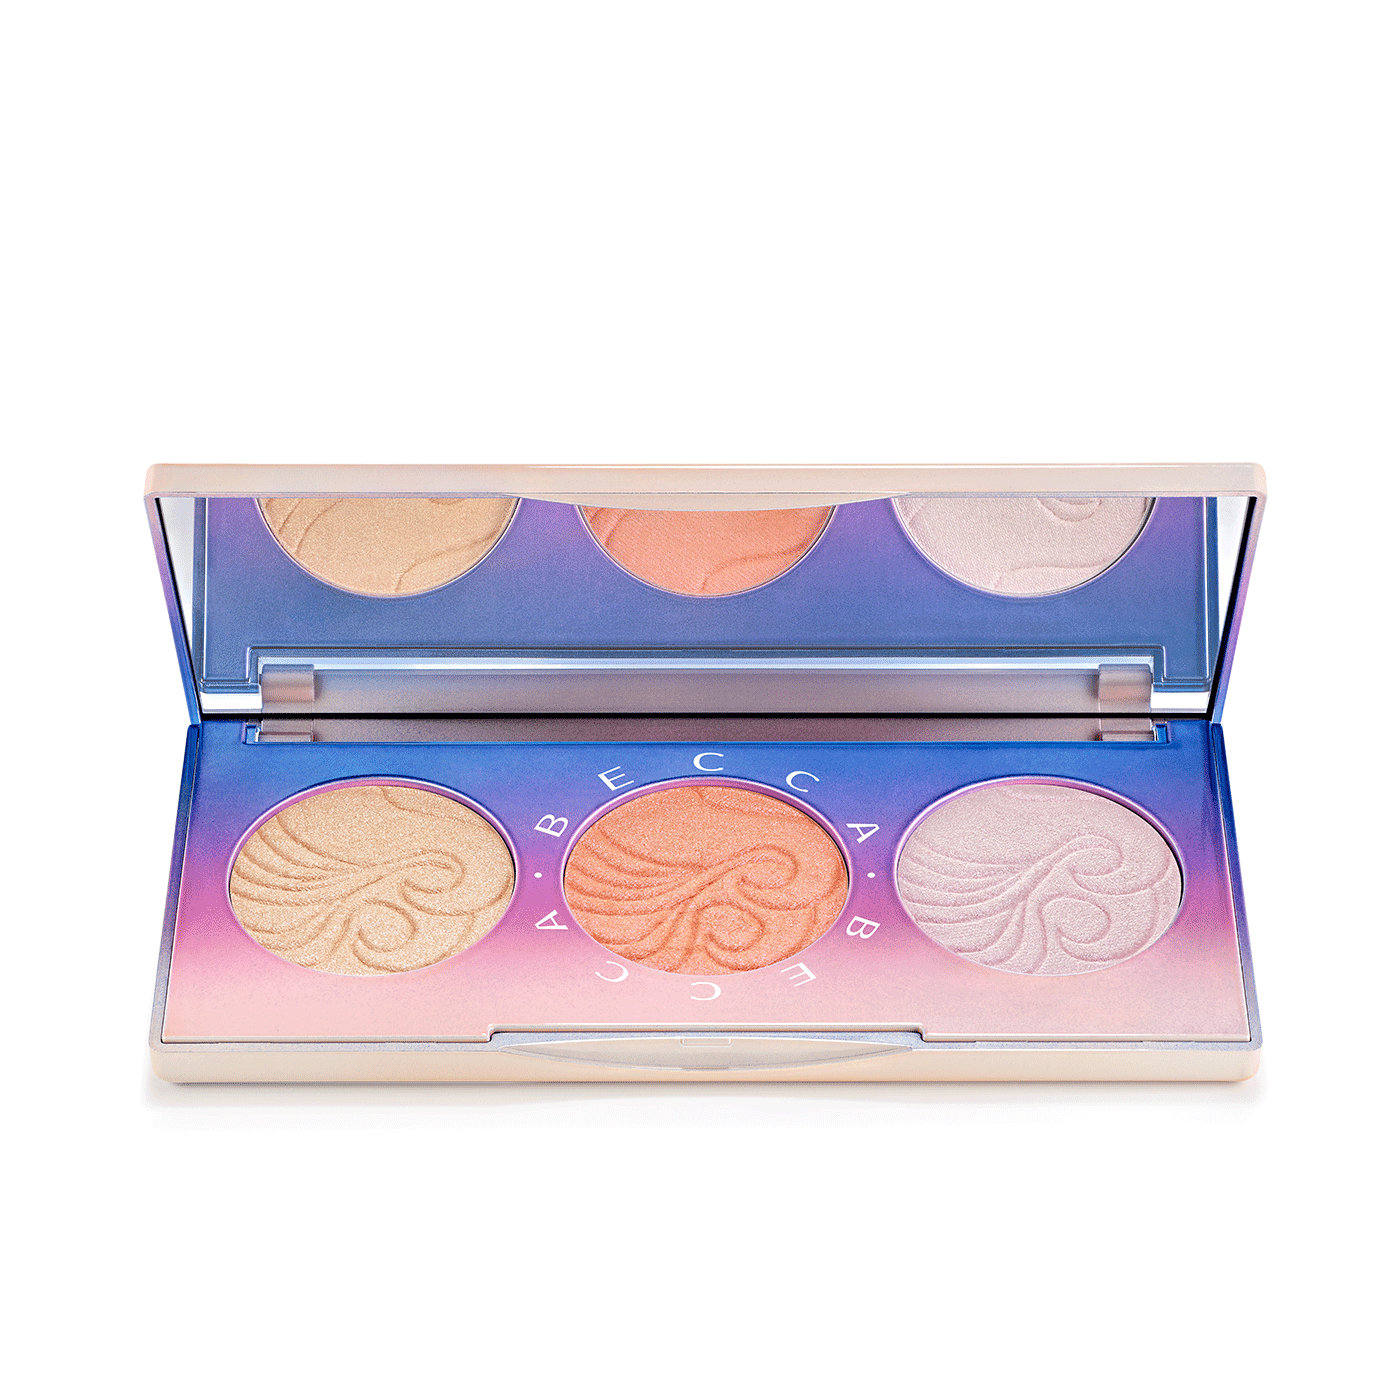 BECCA Light Waves Highlighter Palette | You Love Makeup, You'll Lose Your Sh*t the 7 Hottest Highlighters For Summer | POPSUGAR Photo 6